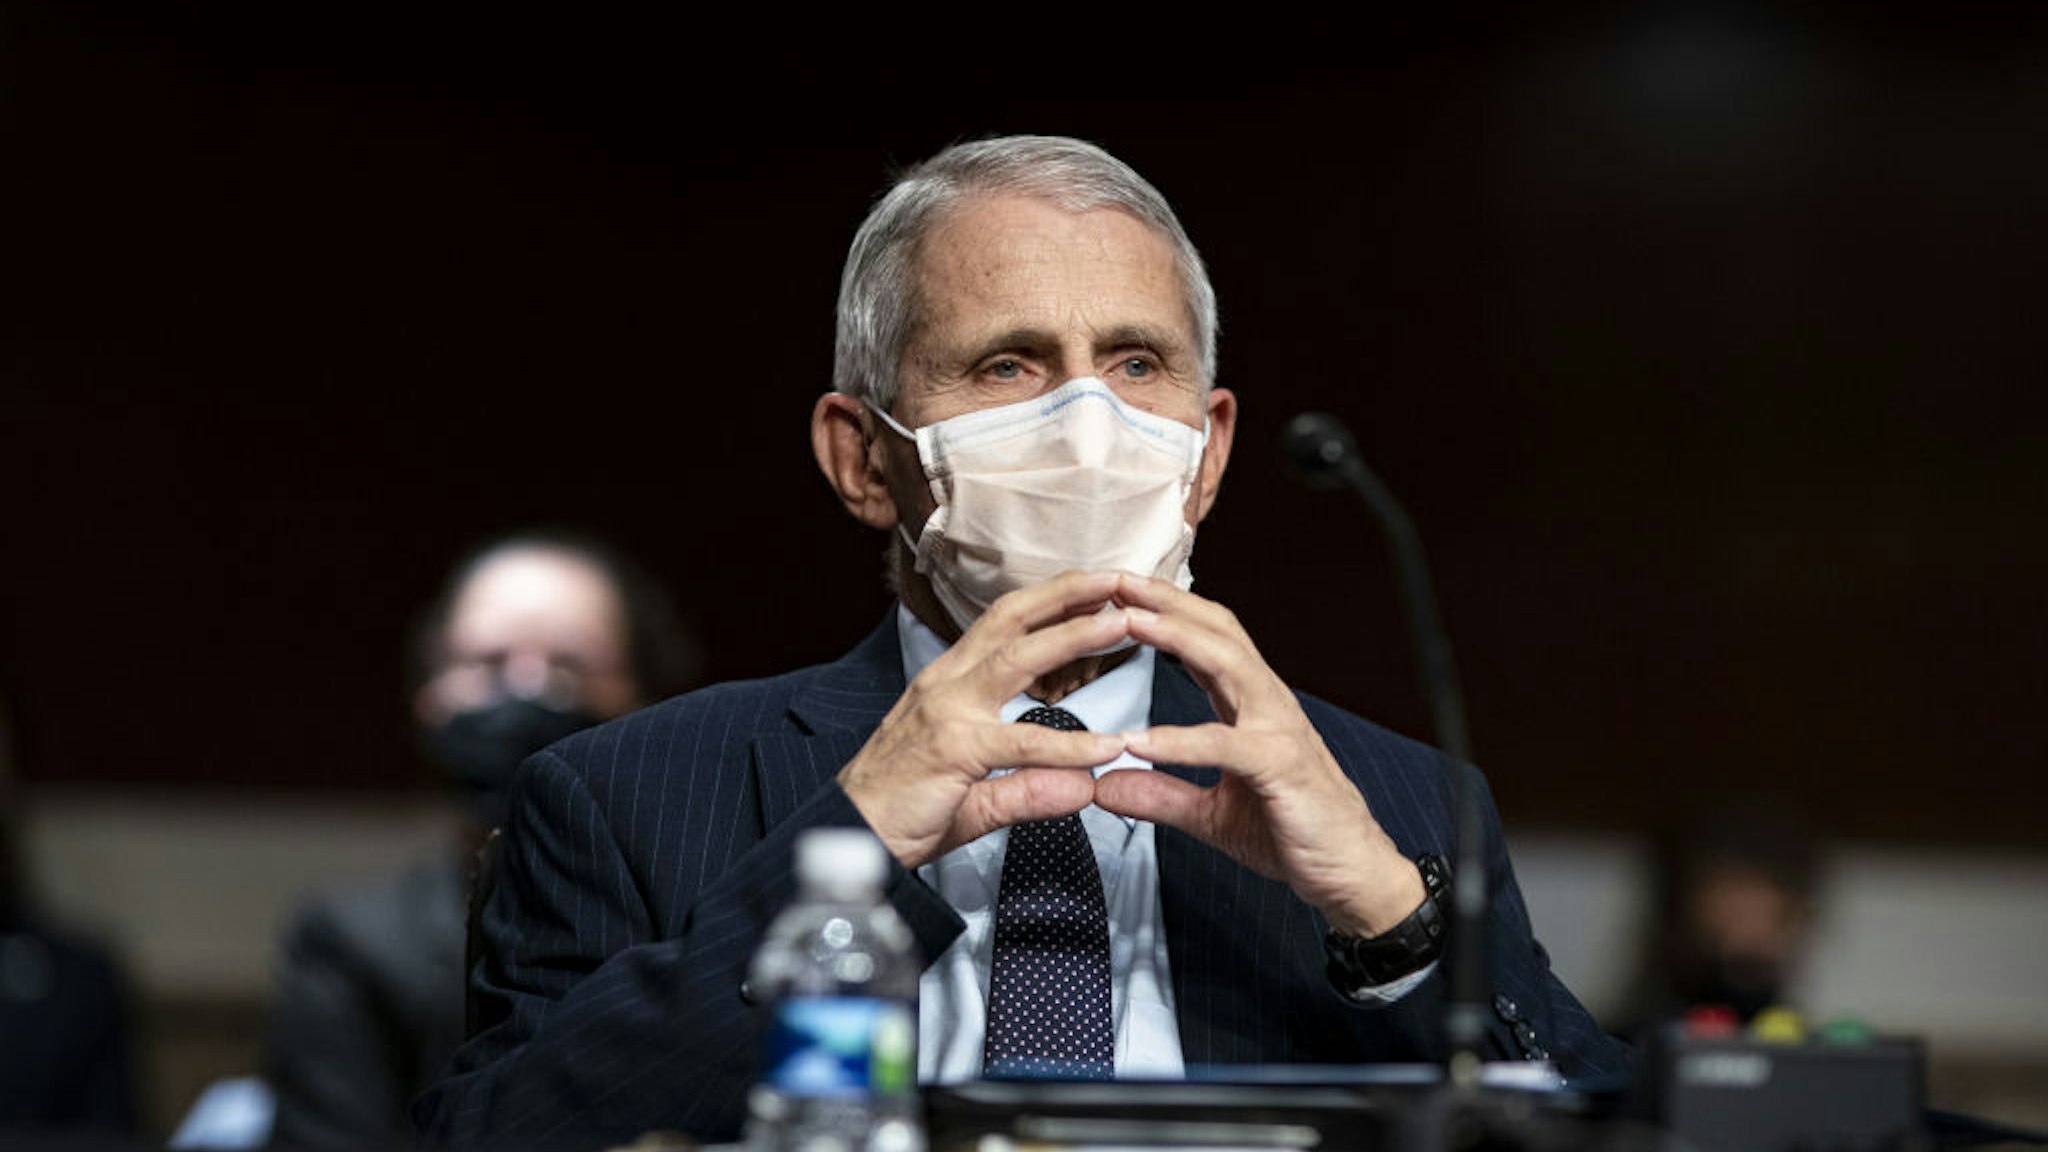 Anthony Fauci, director of the National Institute of Allergy and Infectious Diseases, listens during a Senate Health, Education, Labor, and Pensions Committee hearing in Washington, D.C., U.S., on Thursday, Nov. 4, 2021. Younger children across the U.S. are now eligible to receive Pfizer's Covid-19 vaccine, after the head of the Centers for Disease Control and Prevention this week granted the final clearance needed for shots to begin. Photographer: Al Drago/Bloomberg via Getty Images